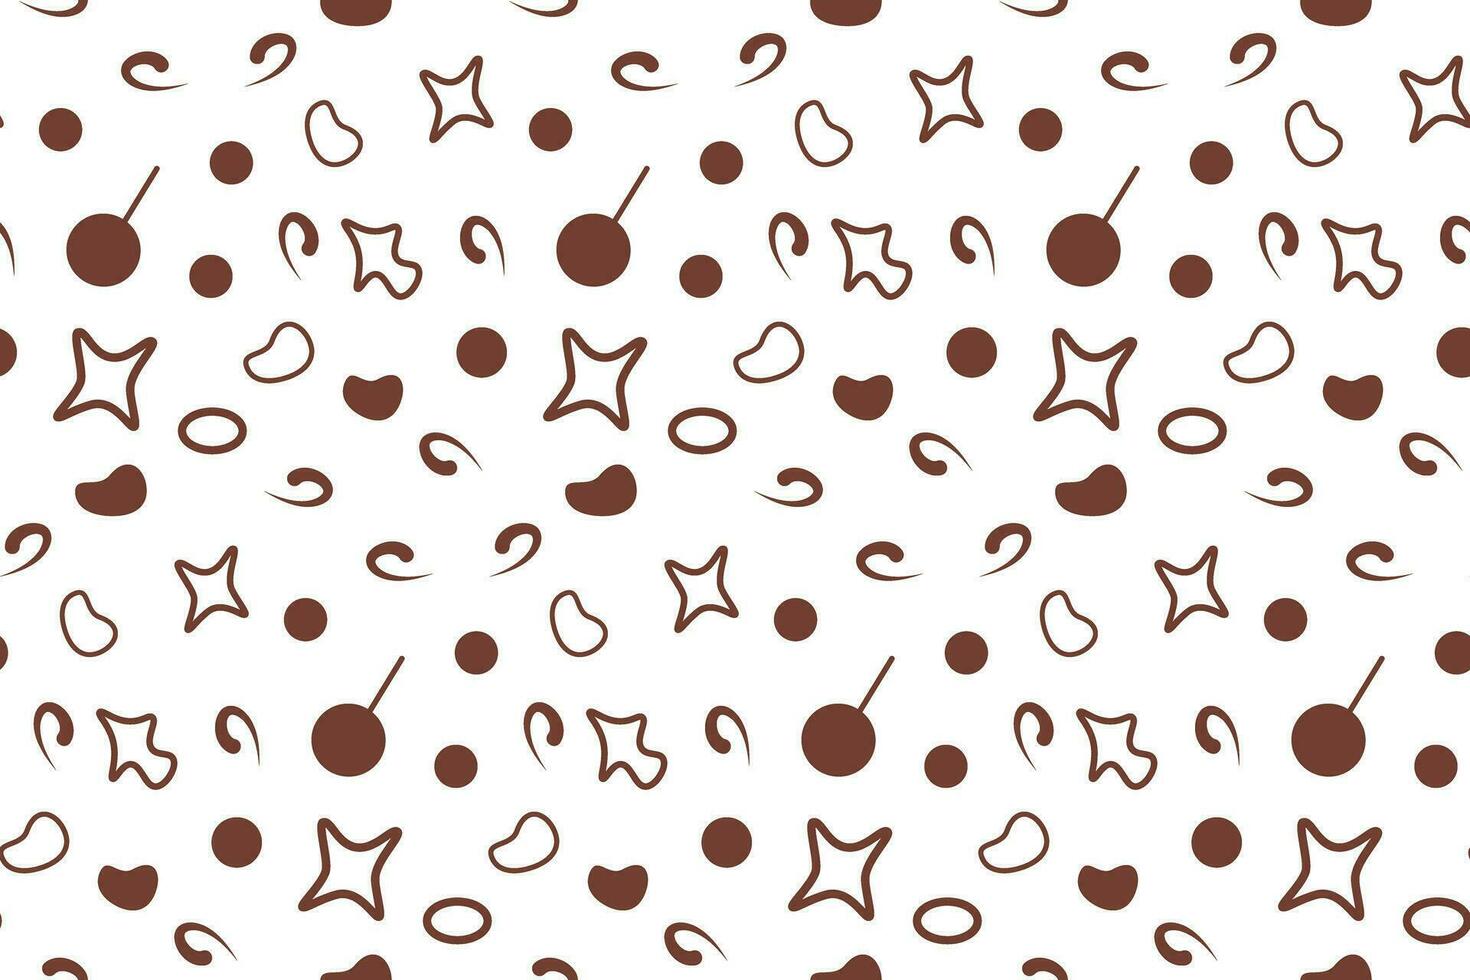 Seamless pattern of abstract images in confectionery decorations in trendy chocolate shade. Isolate vector